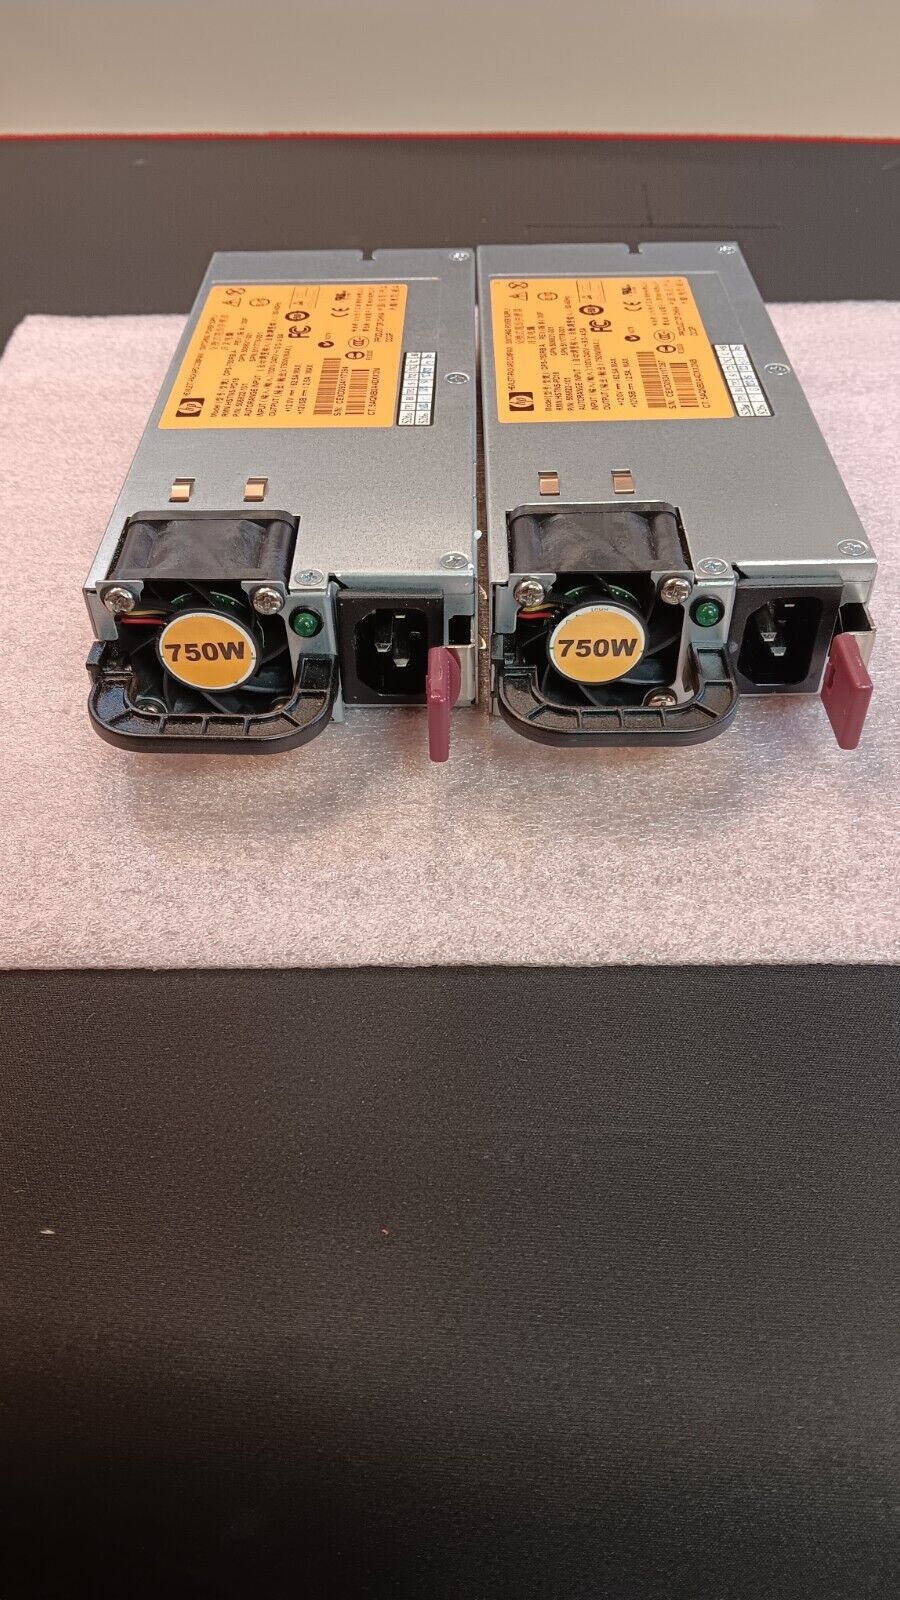 lot of 2 HP DPS-750RB A 750W Power Supply PSU 506822-101 511778-001 HSTNS-PD18